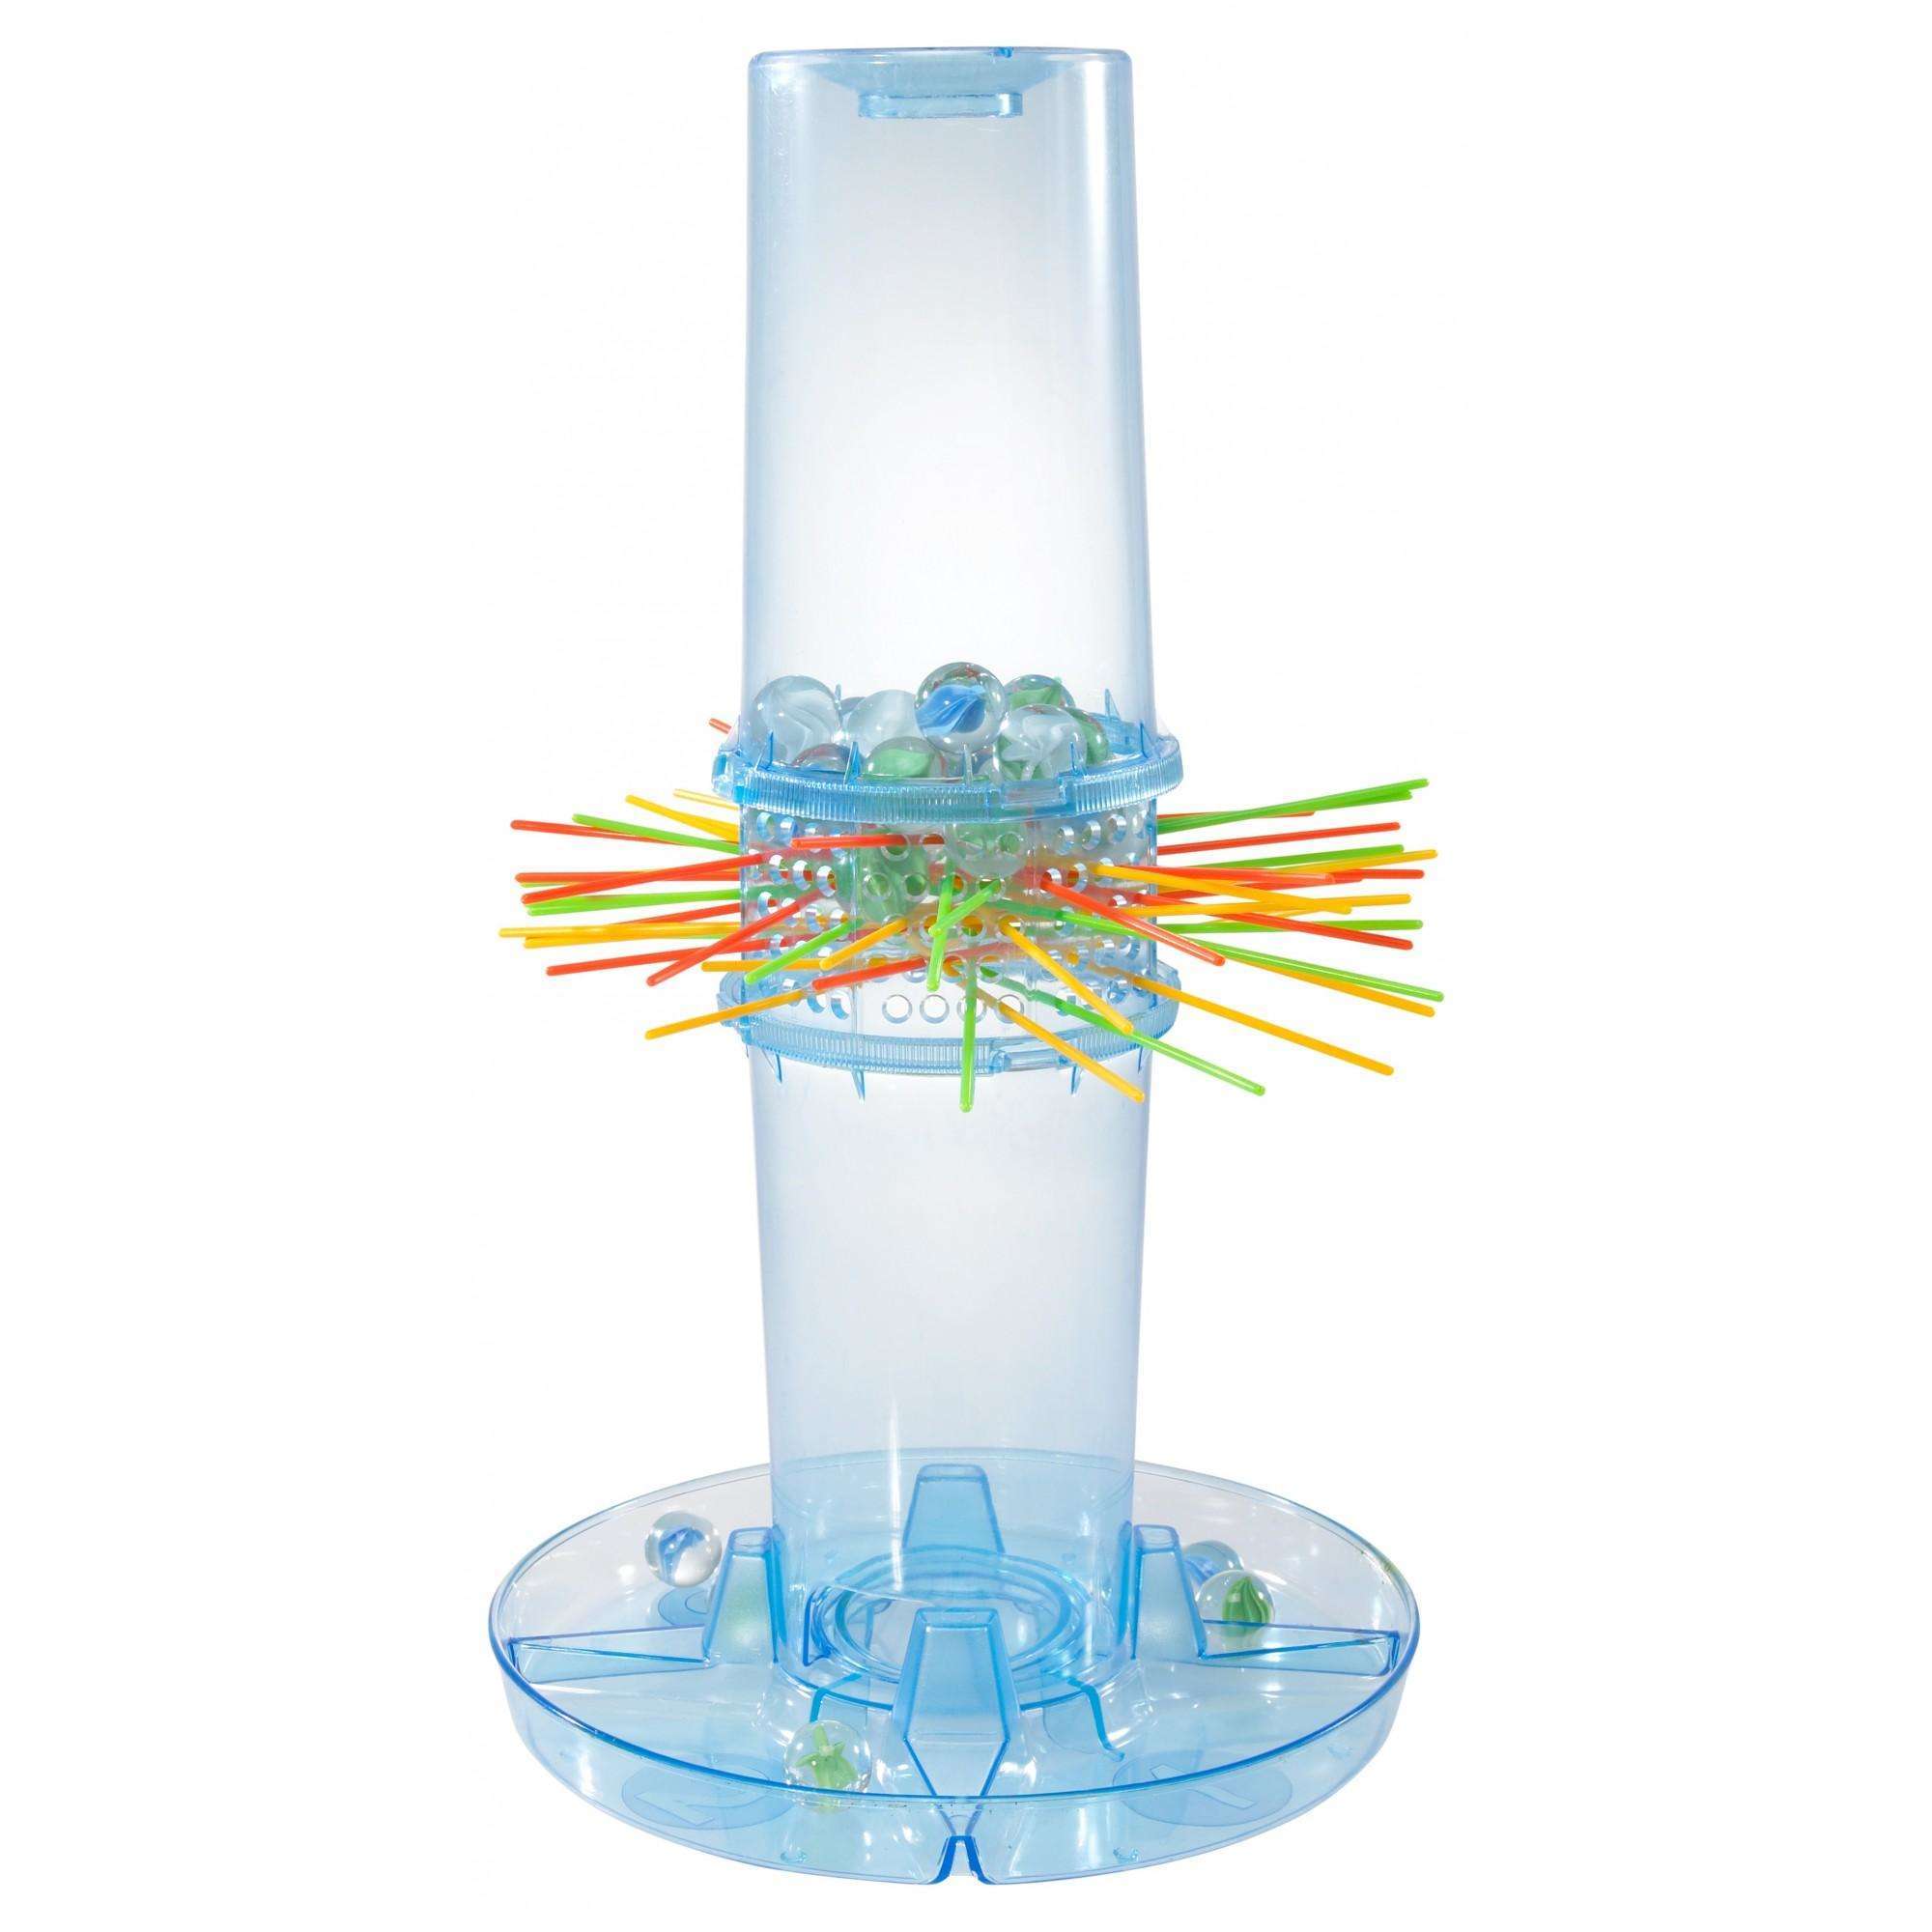 FAQs About KerPlunk